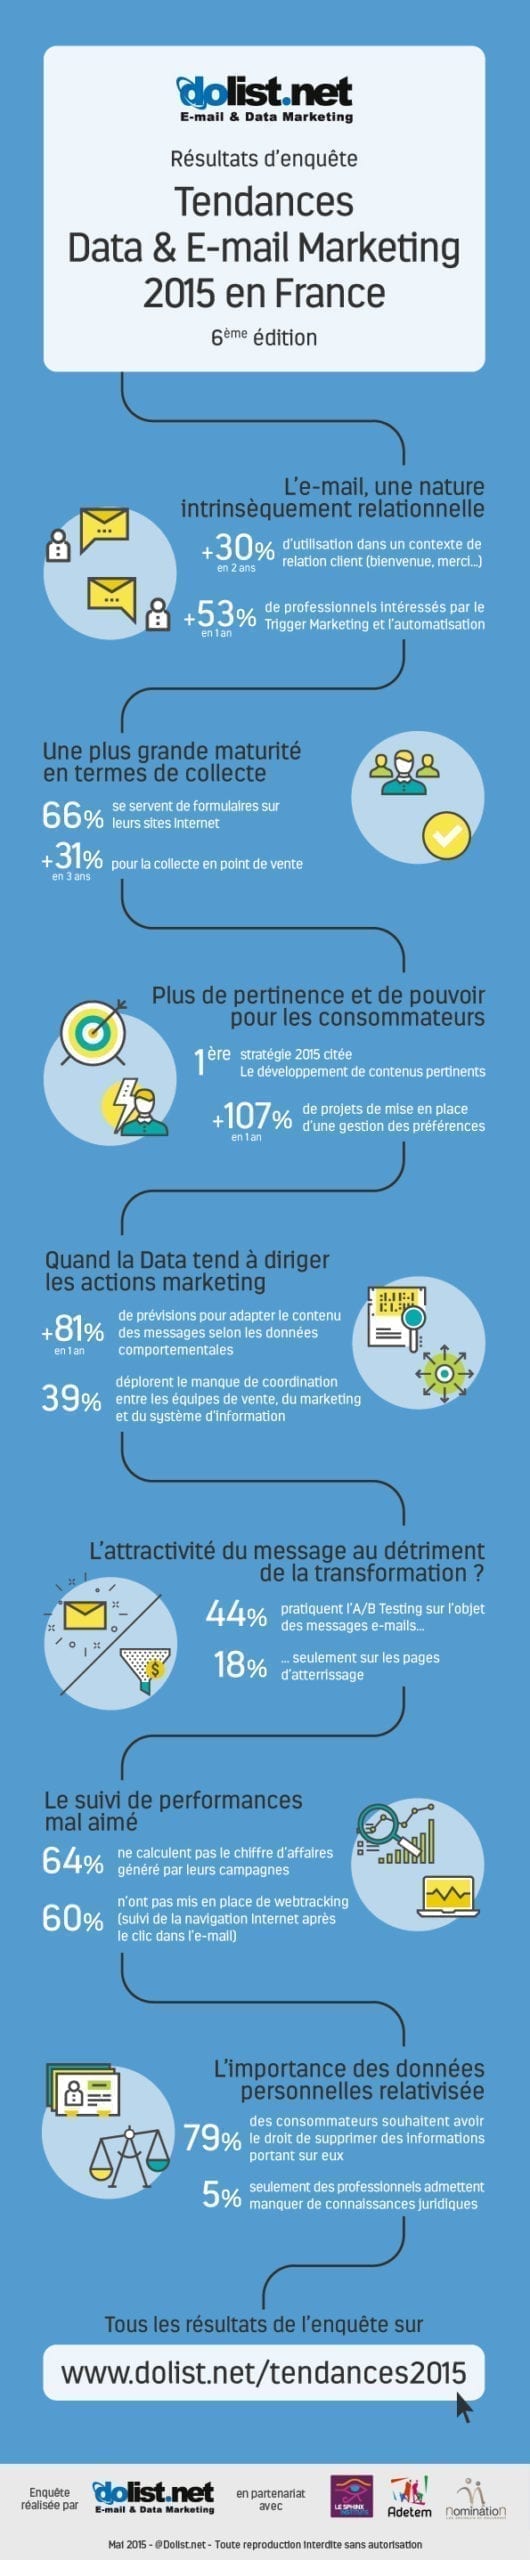 infography-dolist-trends-email-marketing-2015